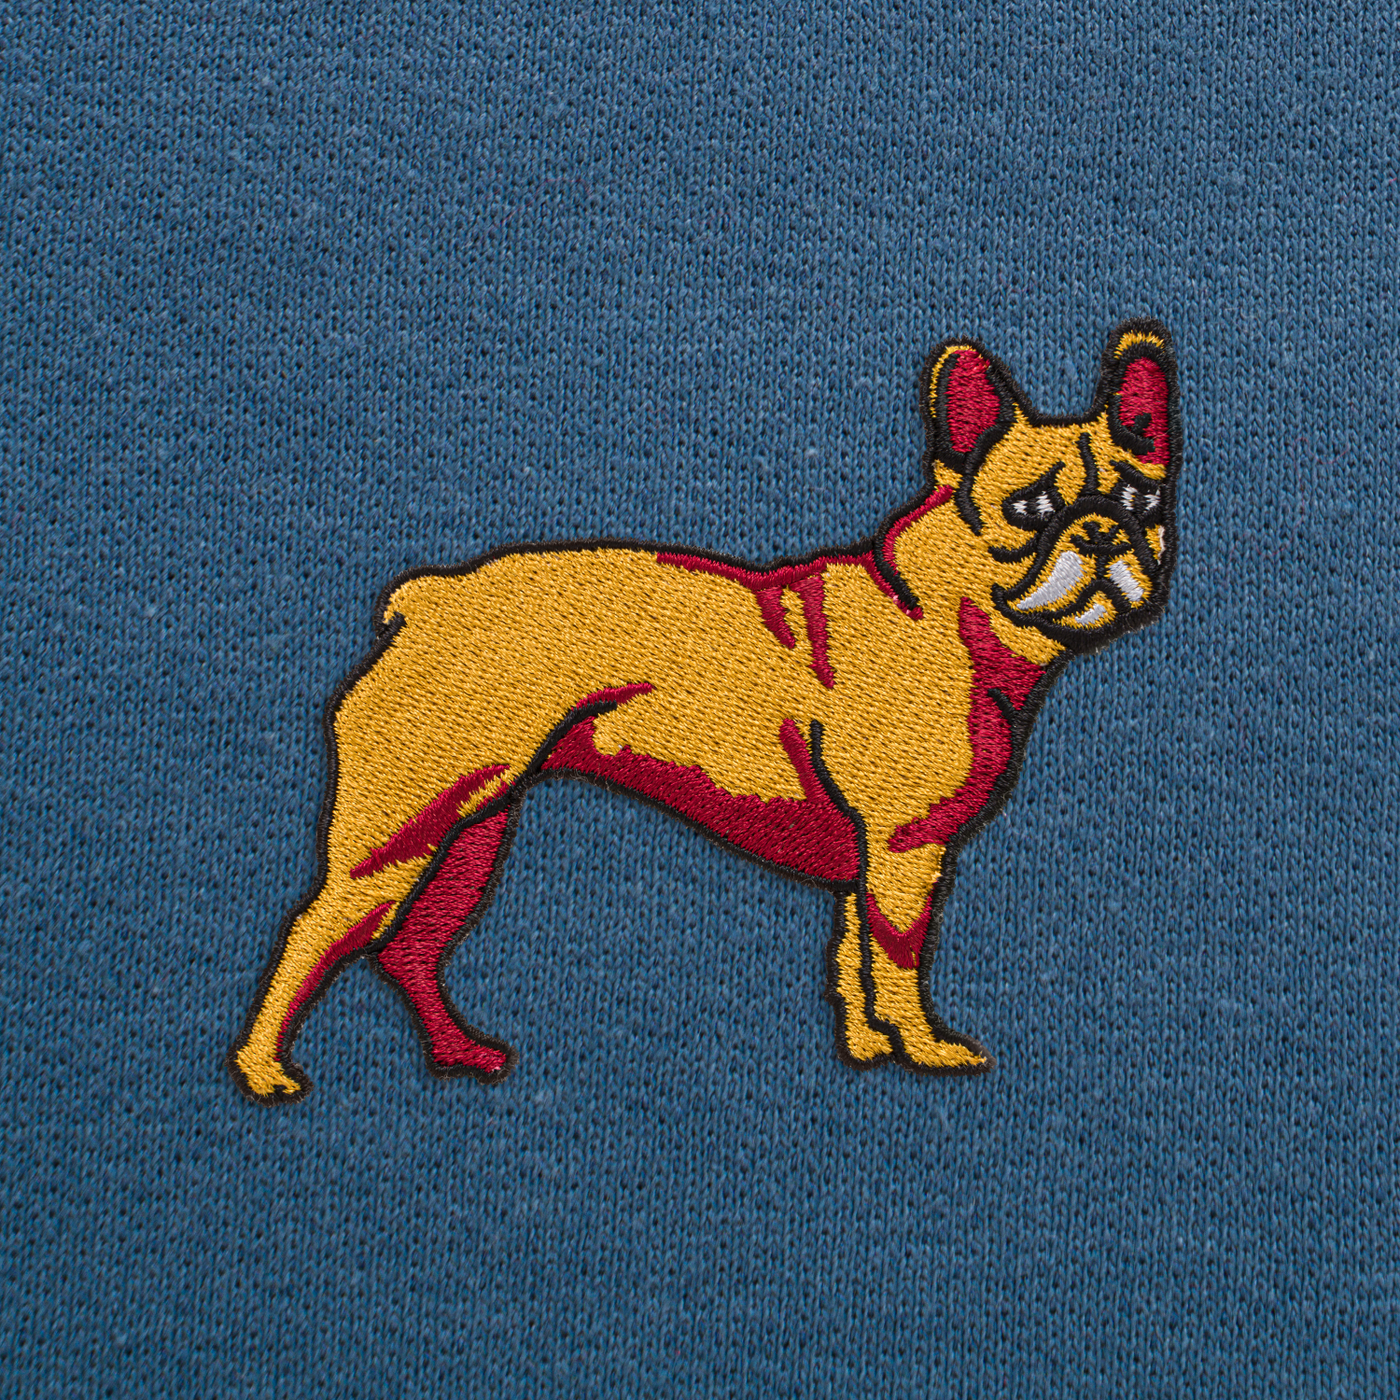 Bobby's Planet Men's Embroidered French Bulldog Sweatshirt from Paws Dog Cat Animals Collection in Indigo Blue Color#color_indigo-blue